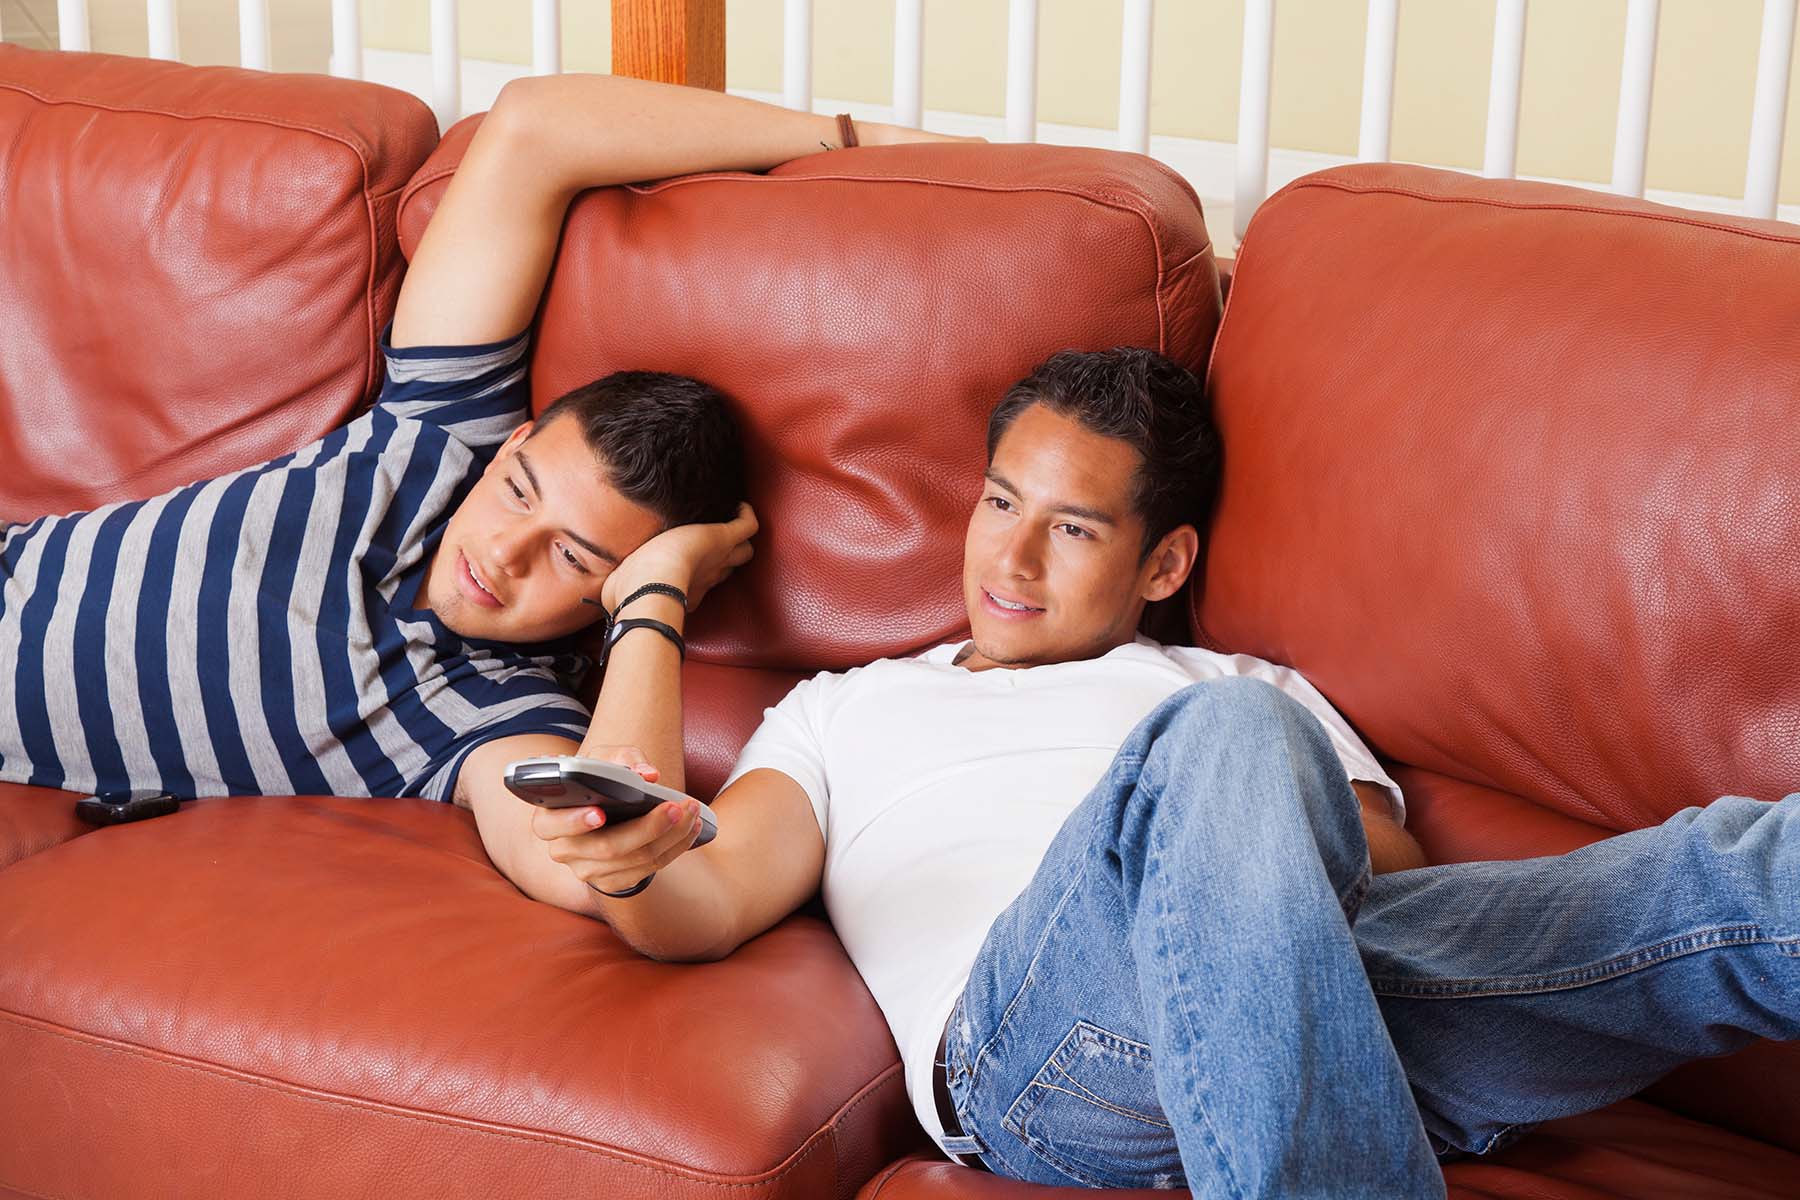 Two Hispanic teen boys flop on a leather couch to watch tv.